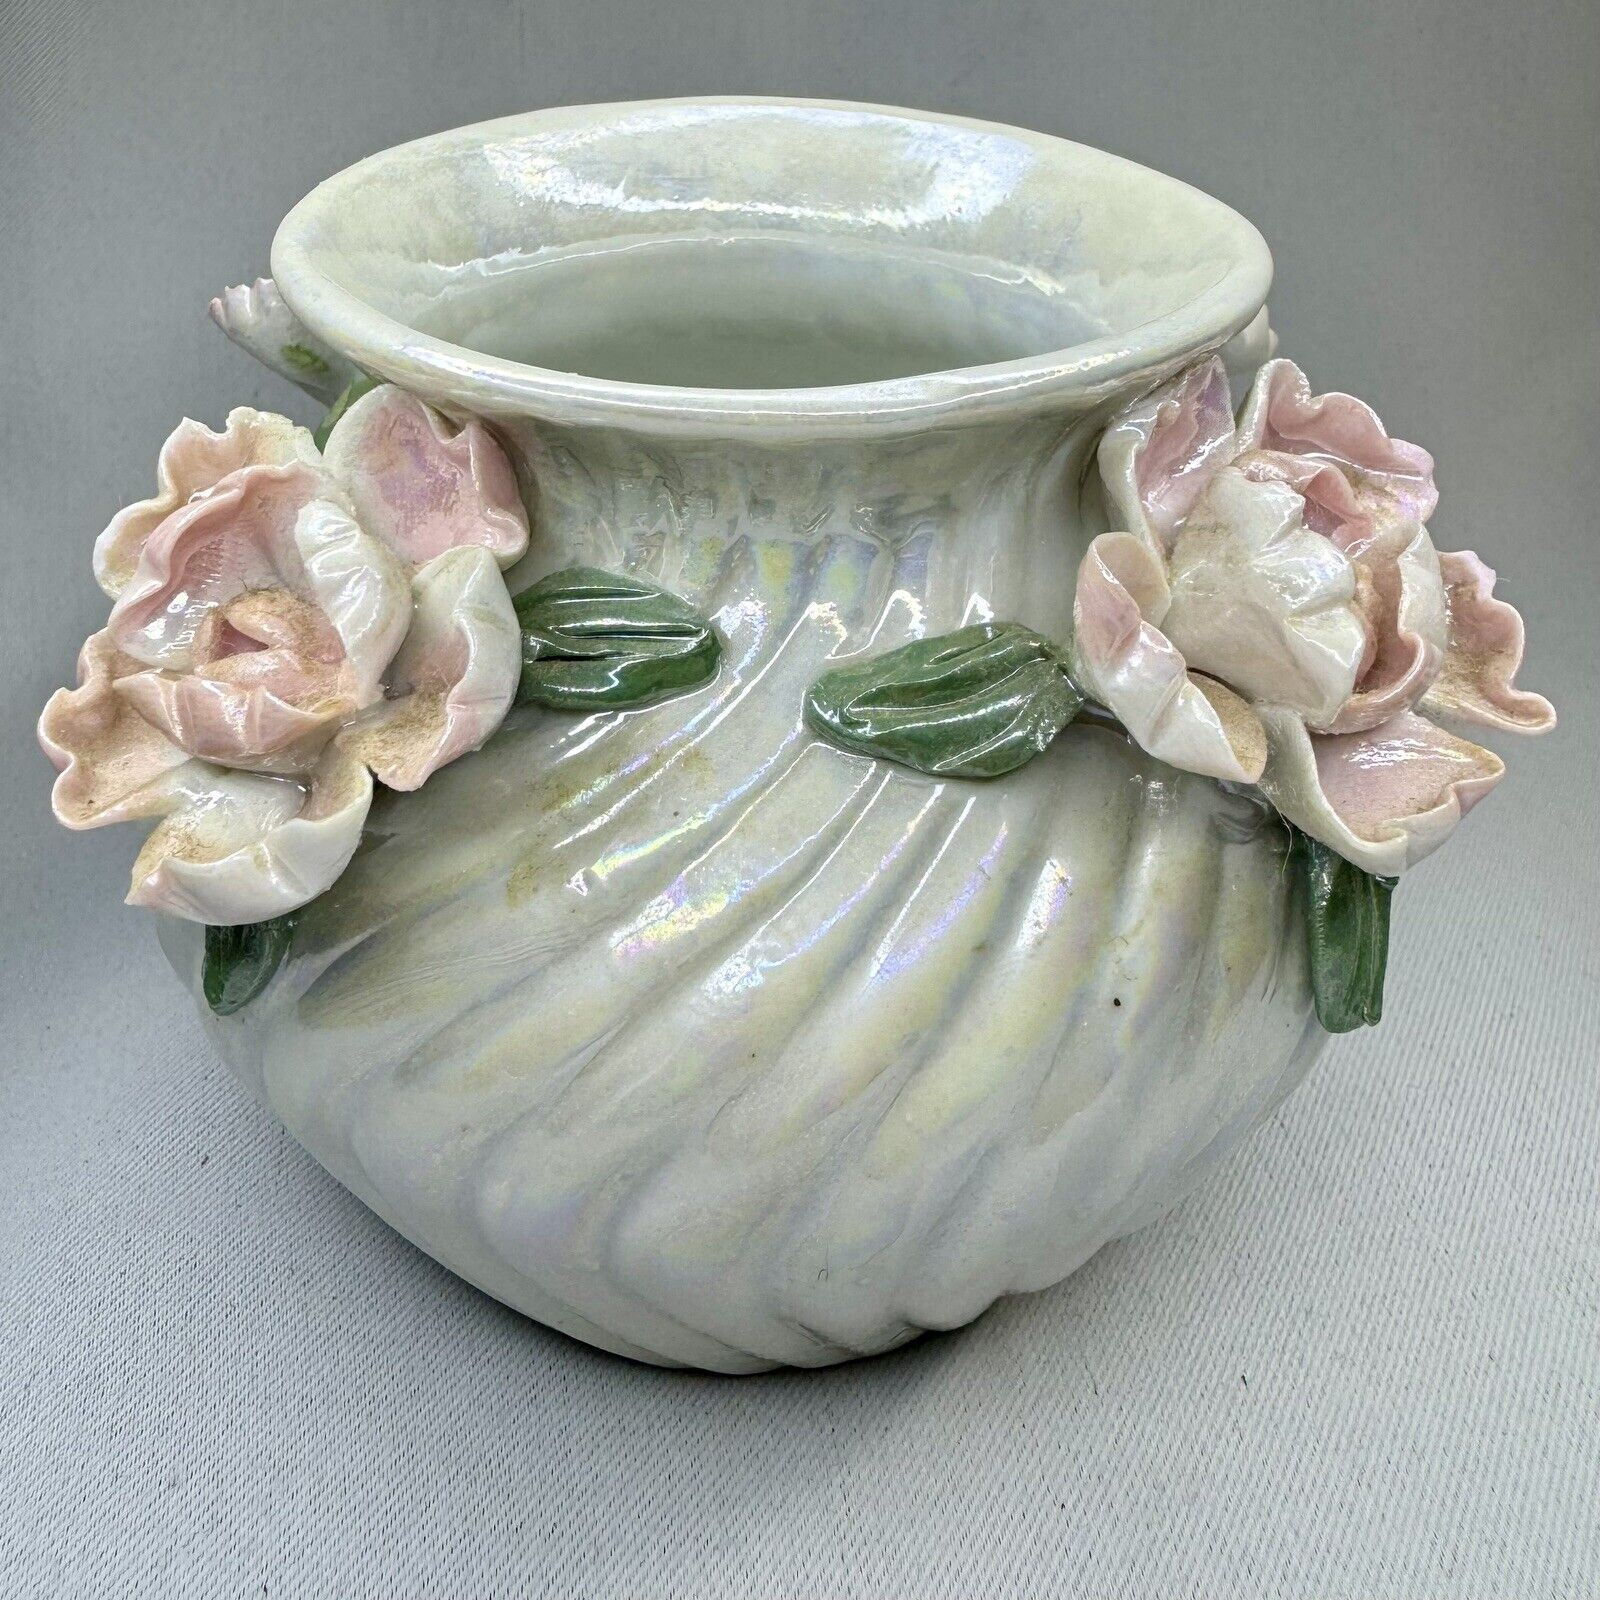 Vintage Pearlized Vase With Flowers Realistic